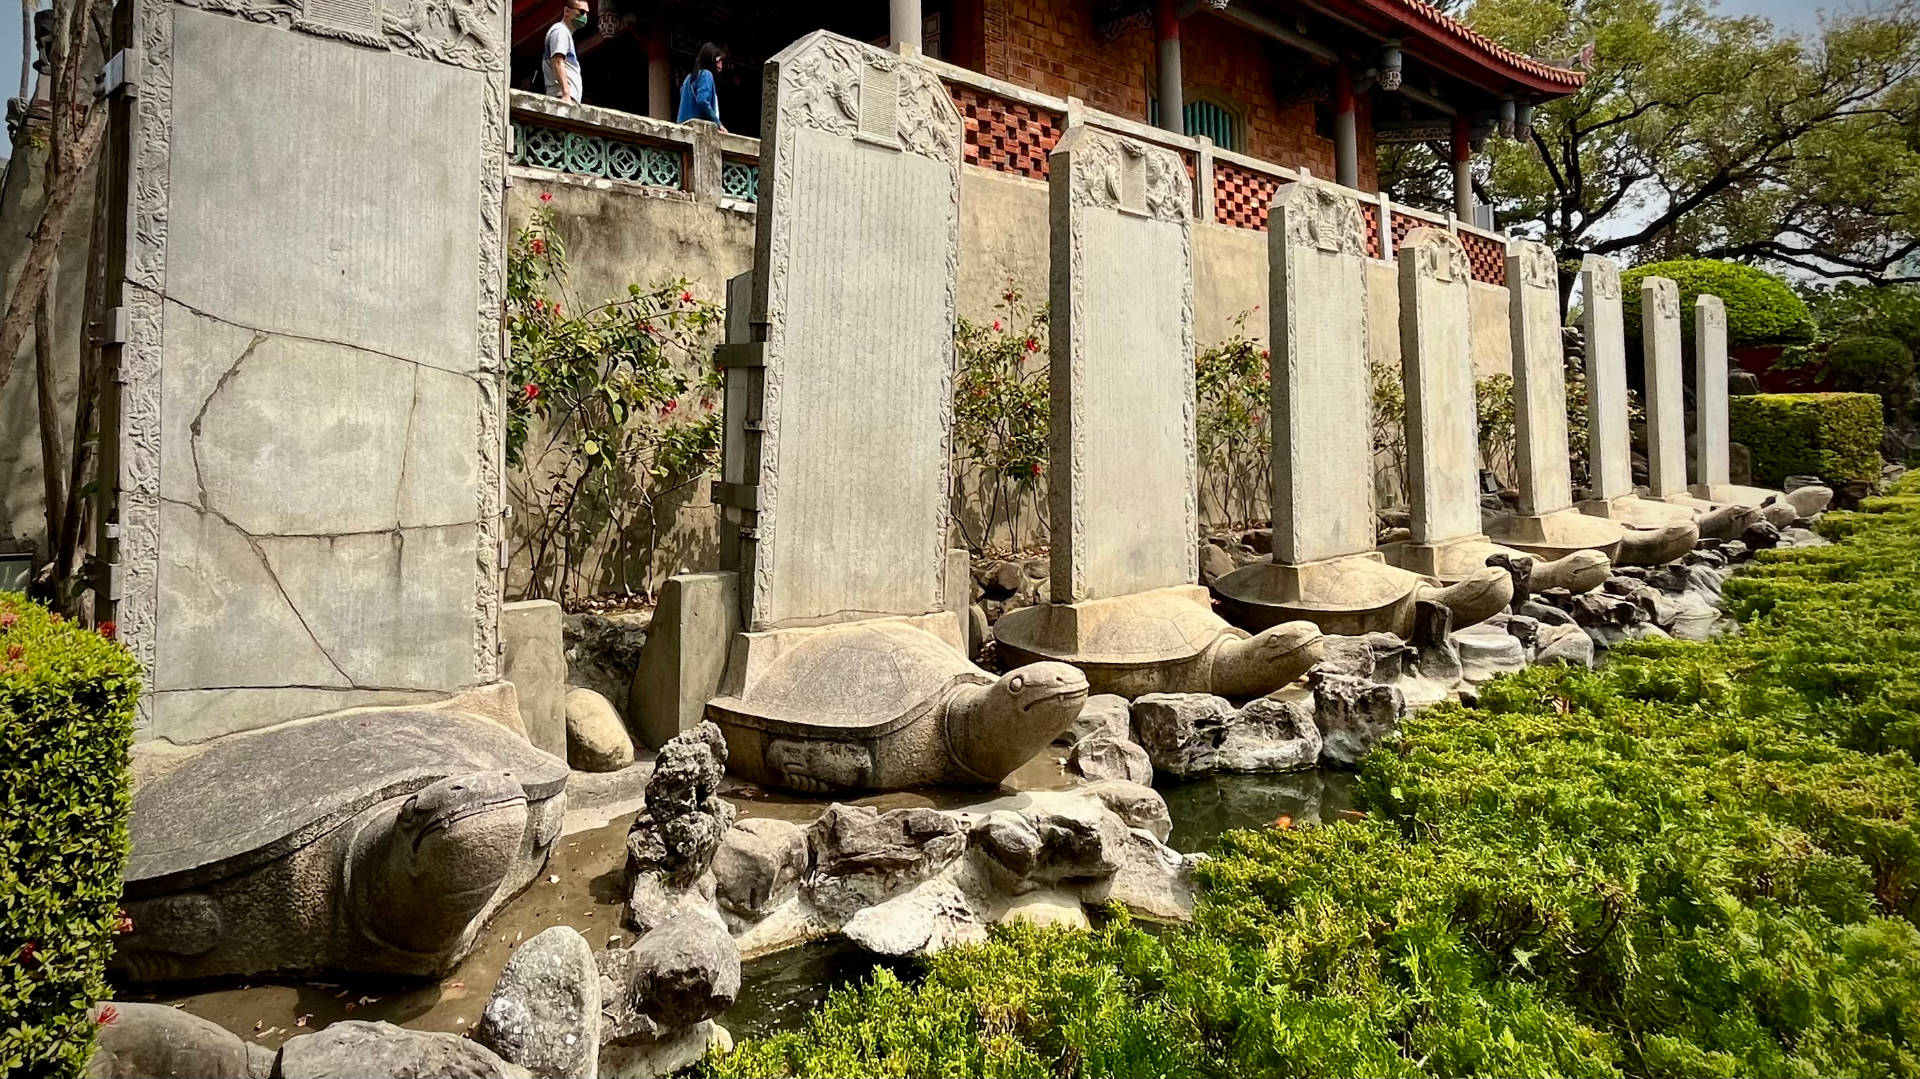 Nine statues of bixi (half-dragon, half-tortoise) creatures carrying upright stone tablets on their backs.